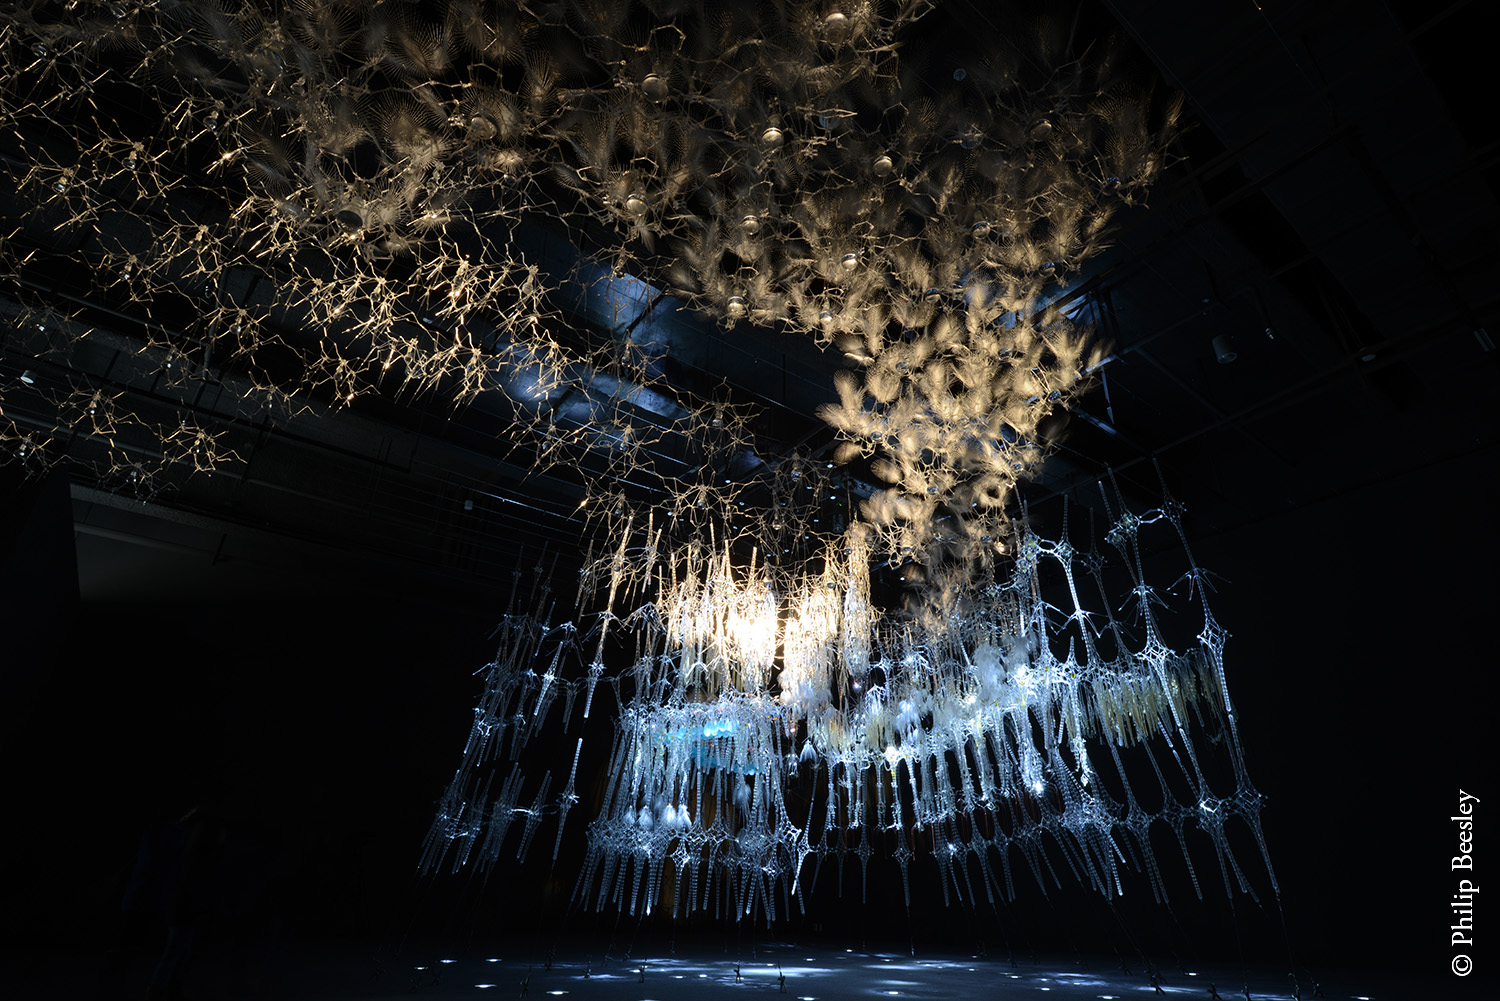   Epiphyte Chamber,  Aleph Exhibition, Seoul 